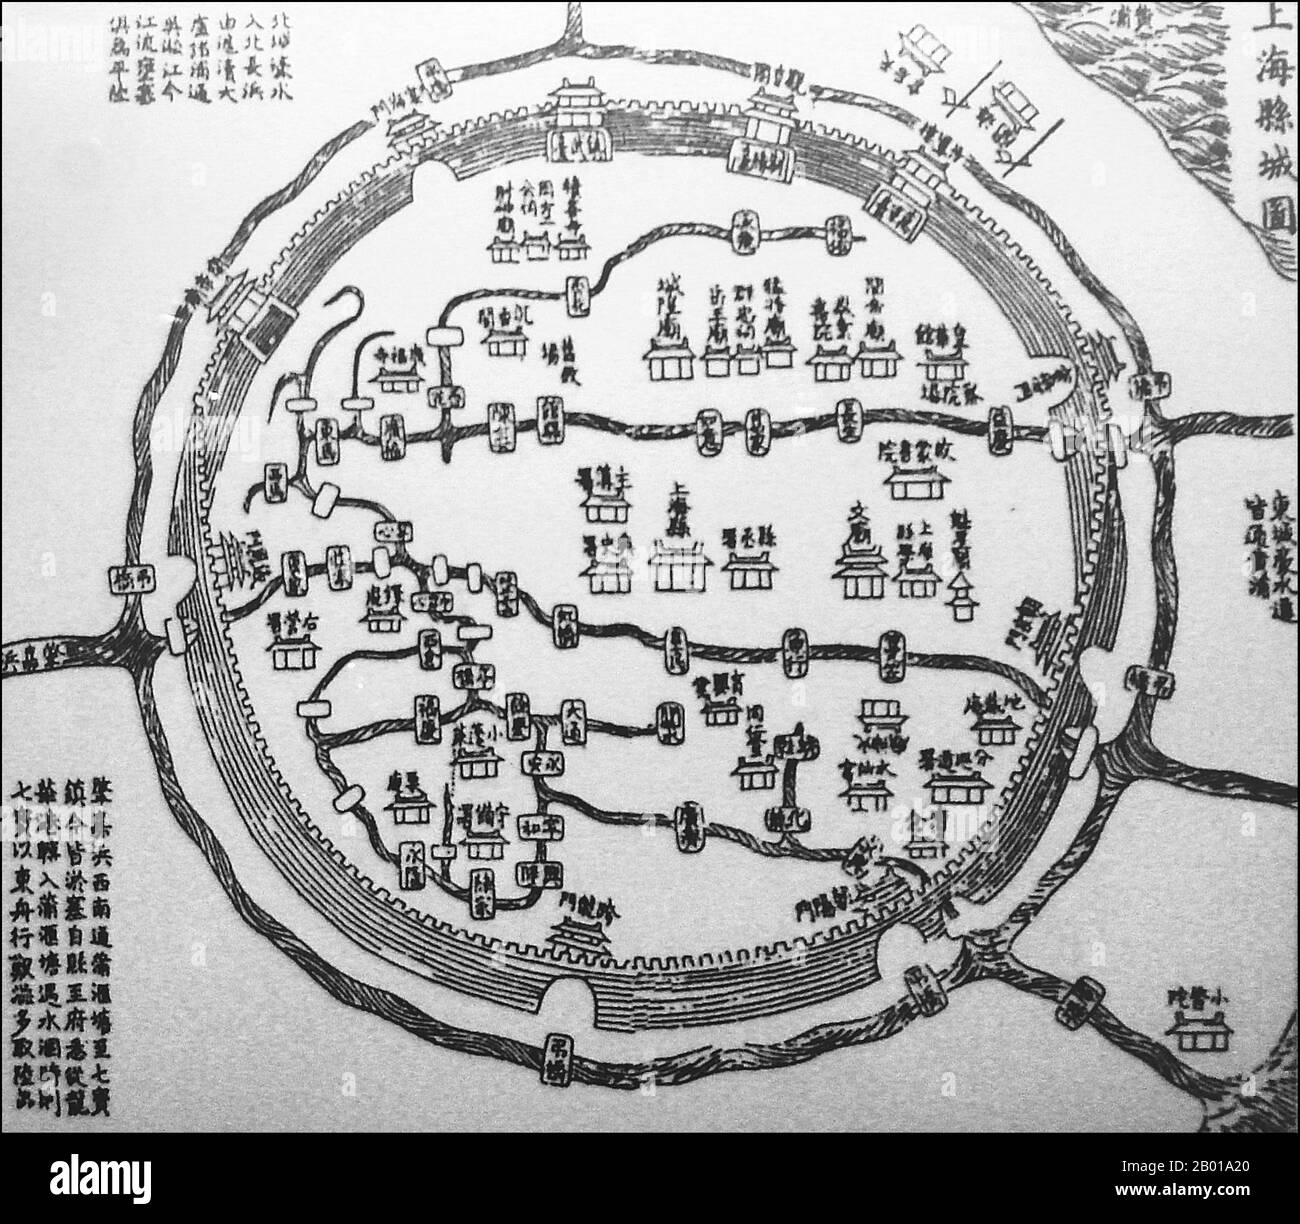 China: A Chinese map of the old city of Shanghai, 1553.  The Old City of Shanghai (Shànghăi Gùchéng) refers to the most ancient area of Shanghai, more often referred to simply as Nanshi, 'Southern City', as it lay to the south of the old International Settlements. It is circular in shape, and used to be surrounded by a defensive wall. Notable features include the City God Temple which is located in the center of the Old City and is connected to the Yuyuan Garden. Today, most of the walls have been replaced by broad circular avenues, the Renmin Lu to the North and Zhonghua Lu to the South. Stock Photo